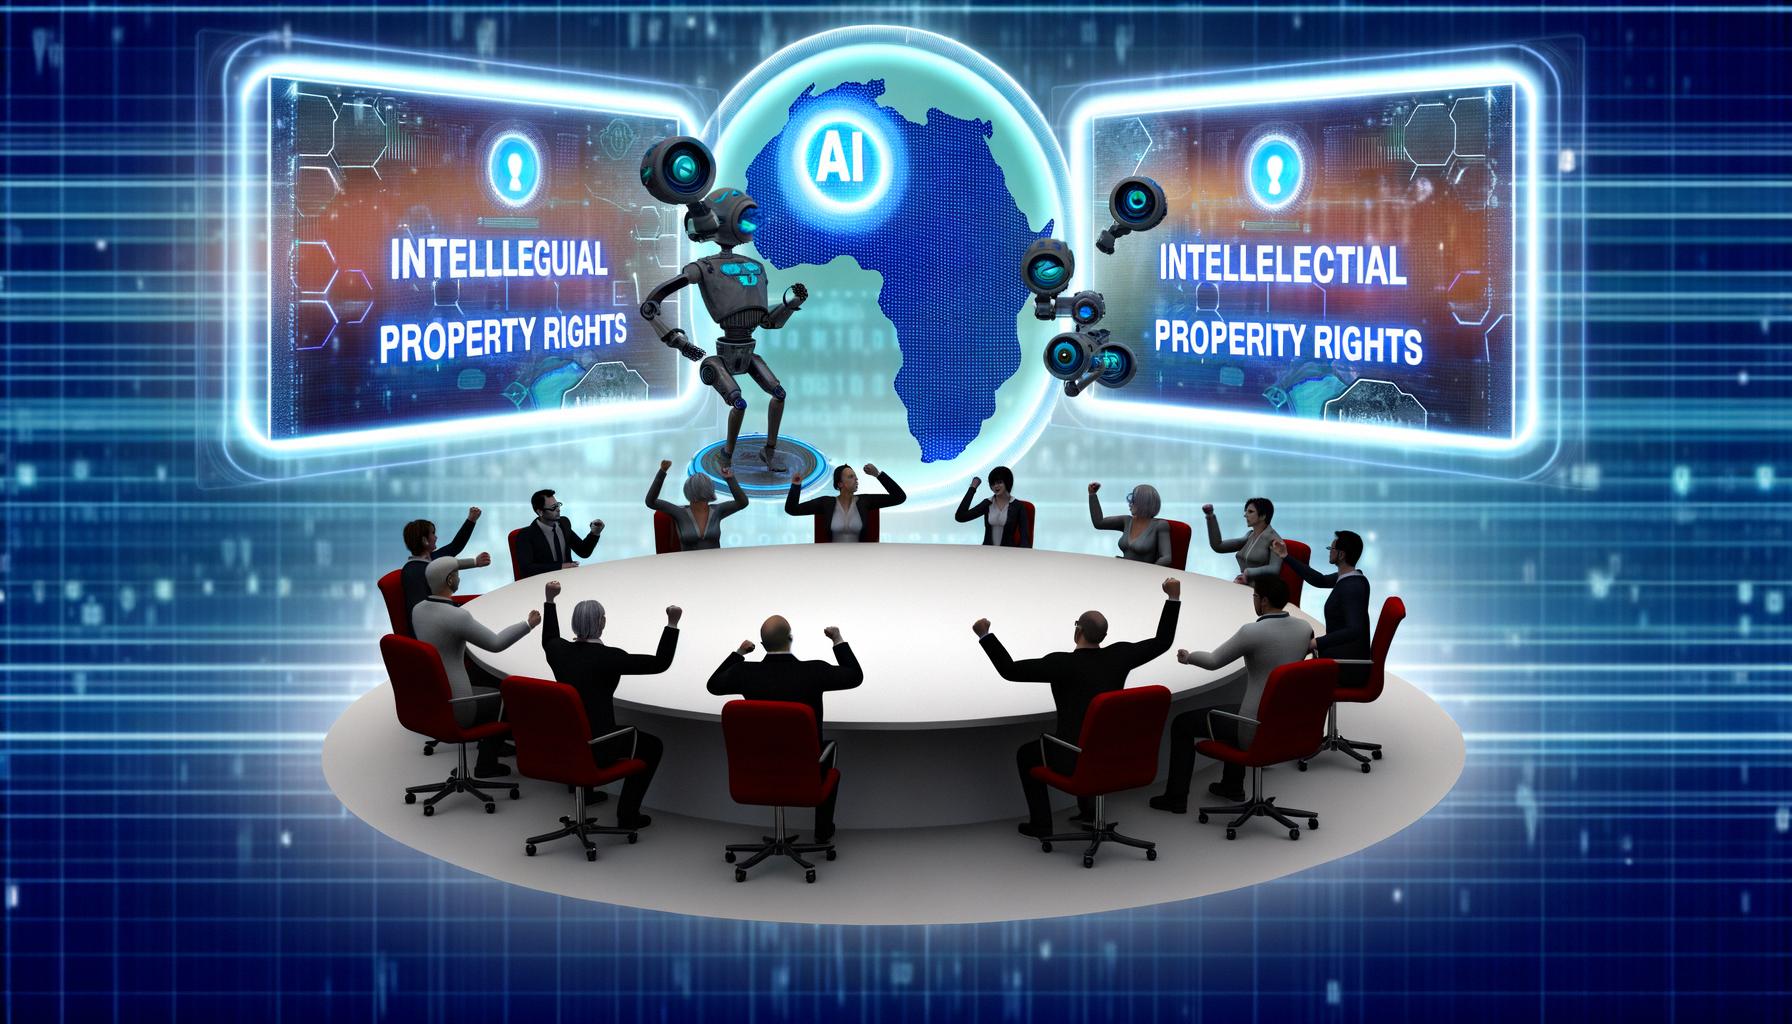 IP rights debates intensify amid AI and tech evolutions